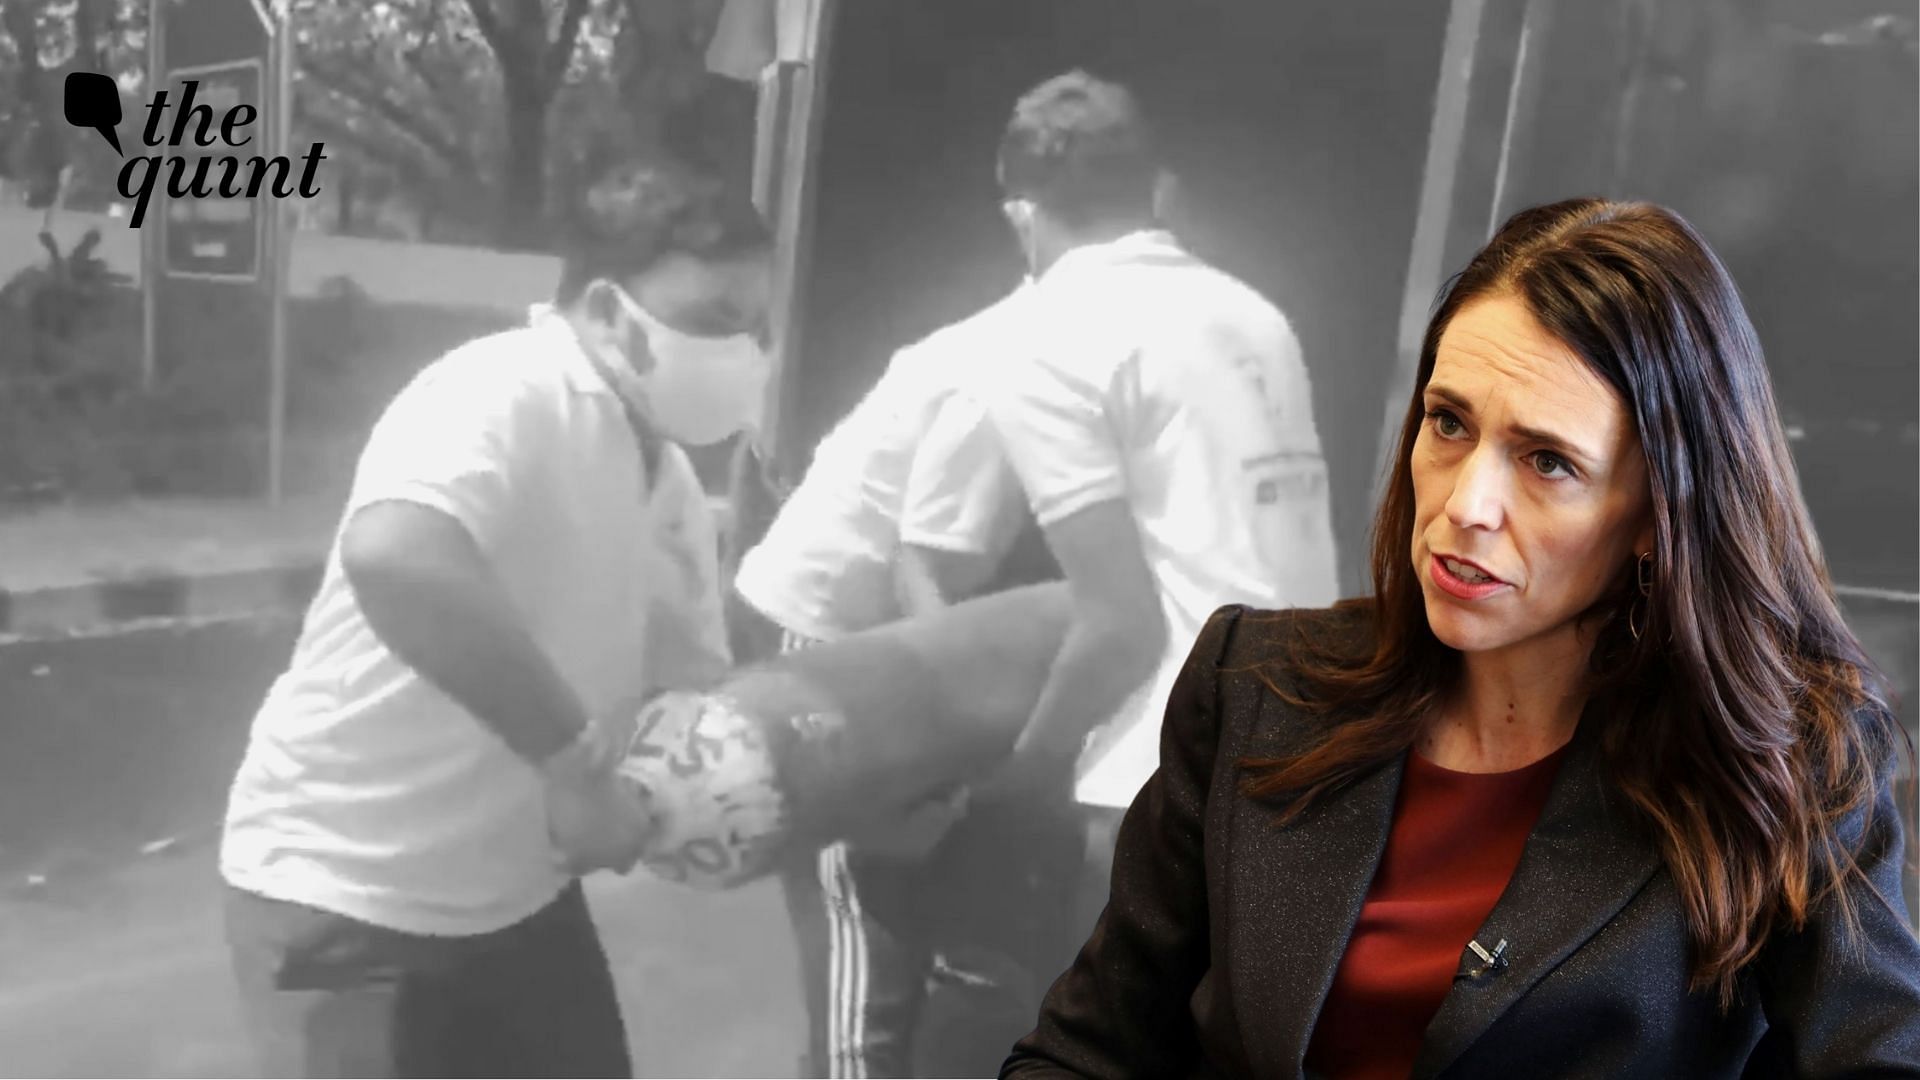 Ardern said that the High Commission is receiving all necessary support from the Indian government amid the pandemic.